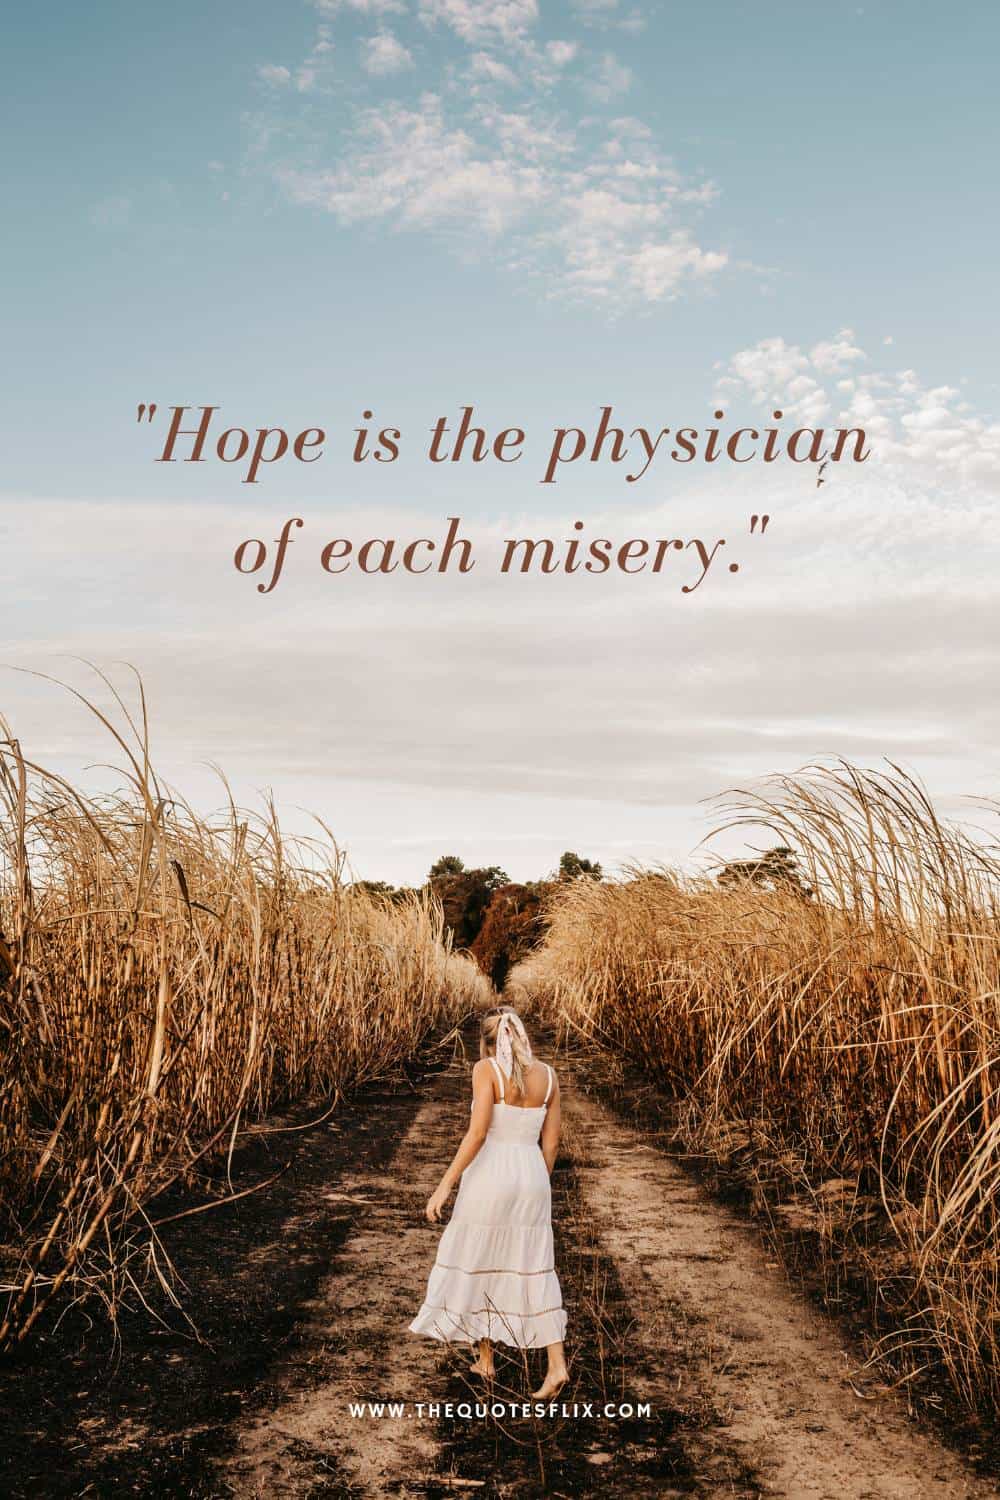 inspirational cancer quotes - hope is physician of misery